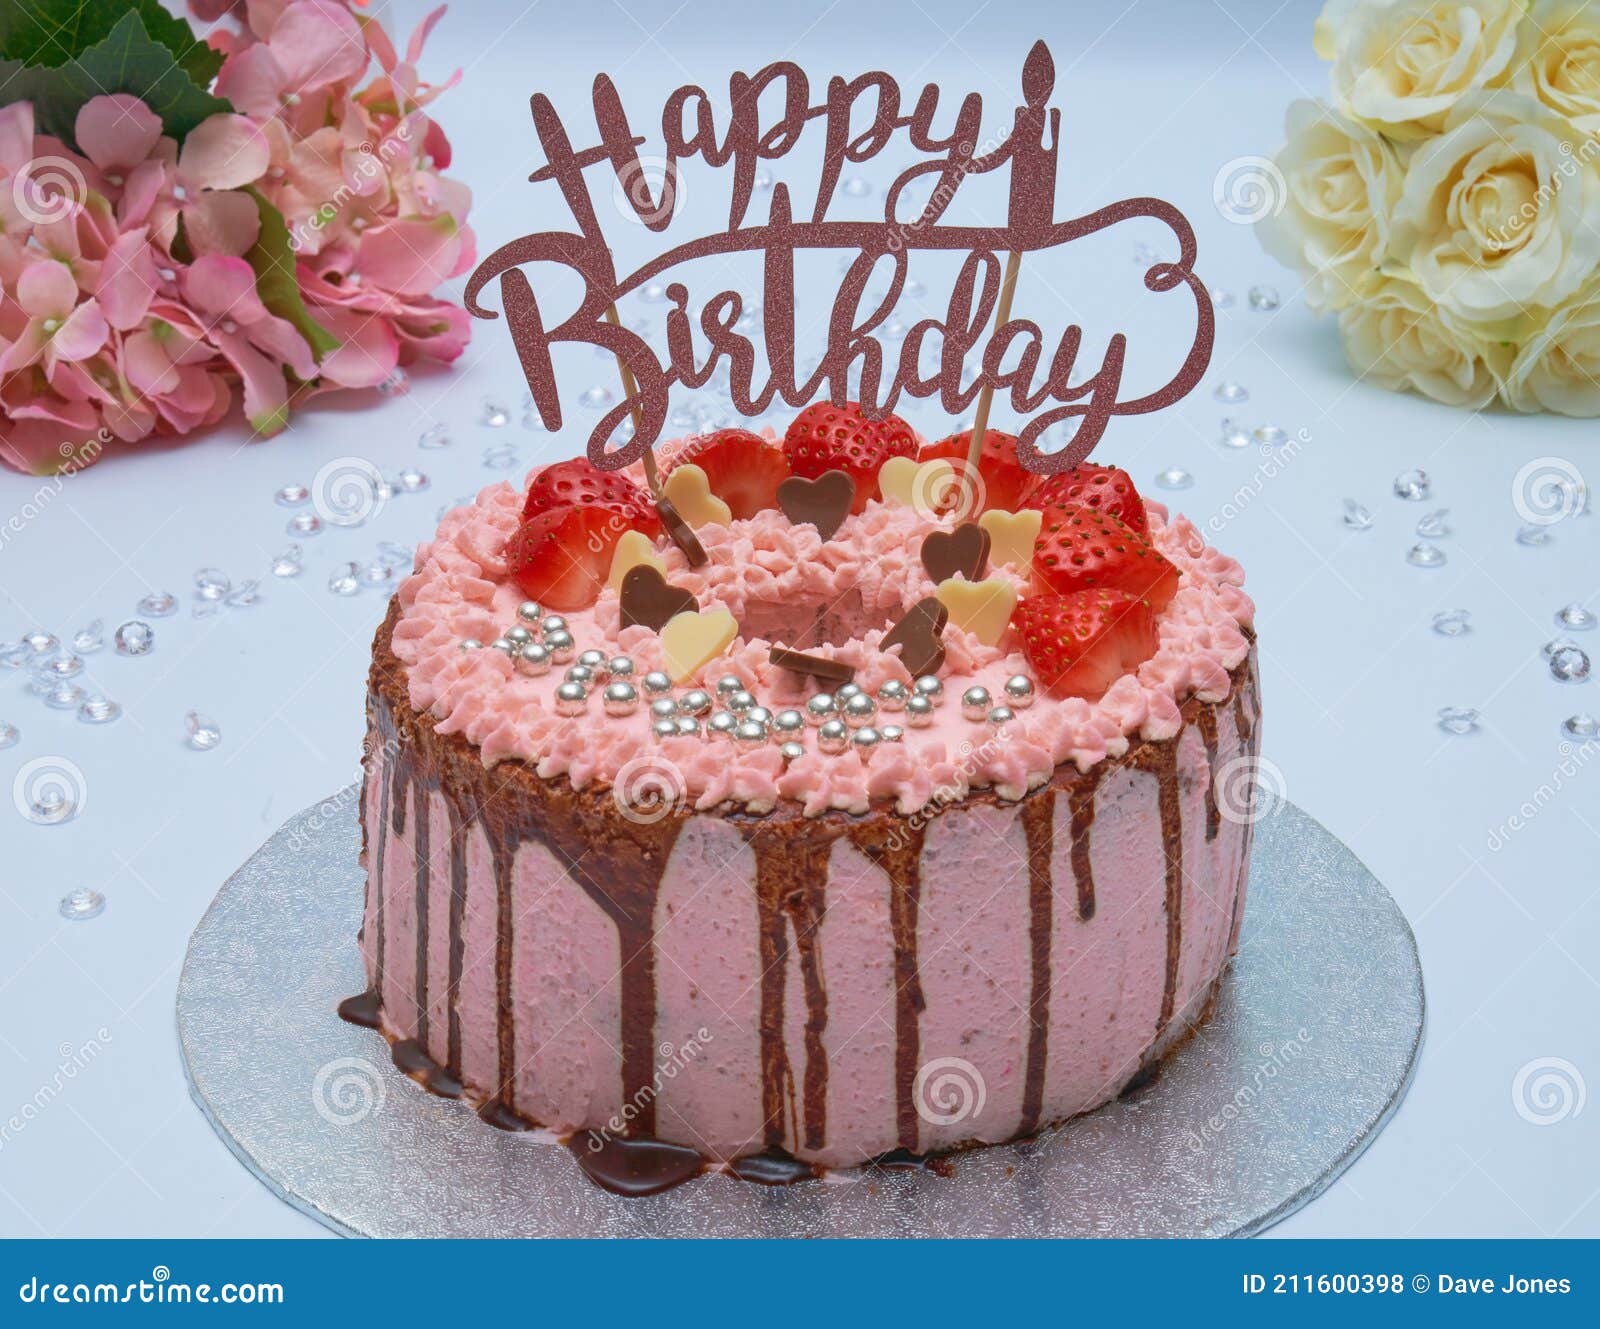 Butterfly Birthday Cake | Artisan Cakes delivery Mauritius